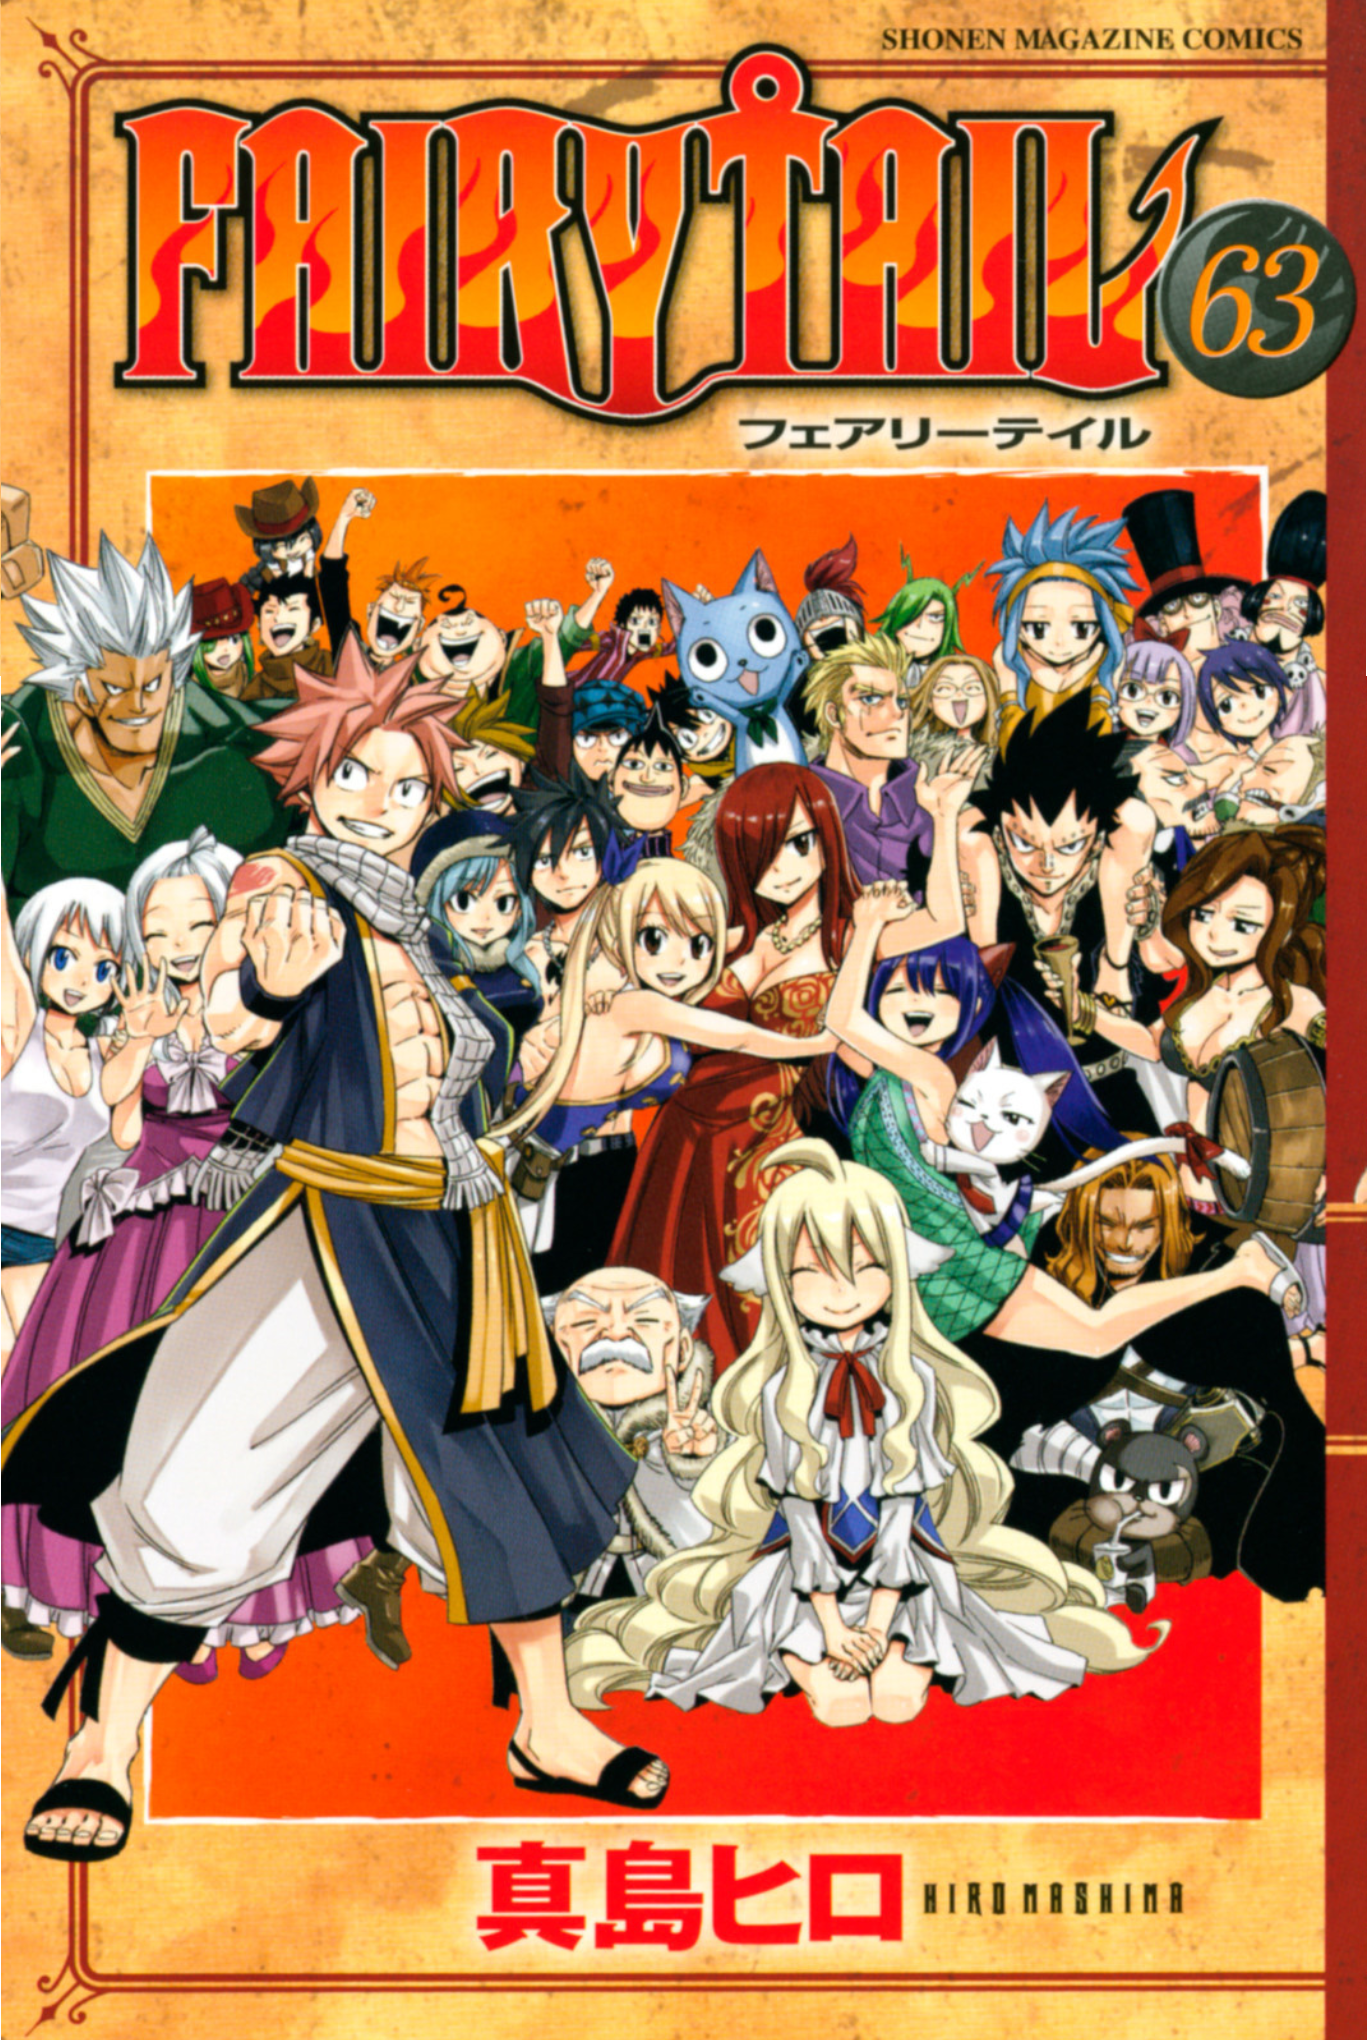 Image Volume 63 Cover.png Fairy Tail Wiki FANDOM powered by Wikia